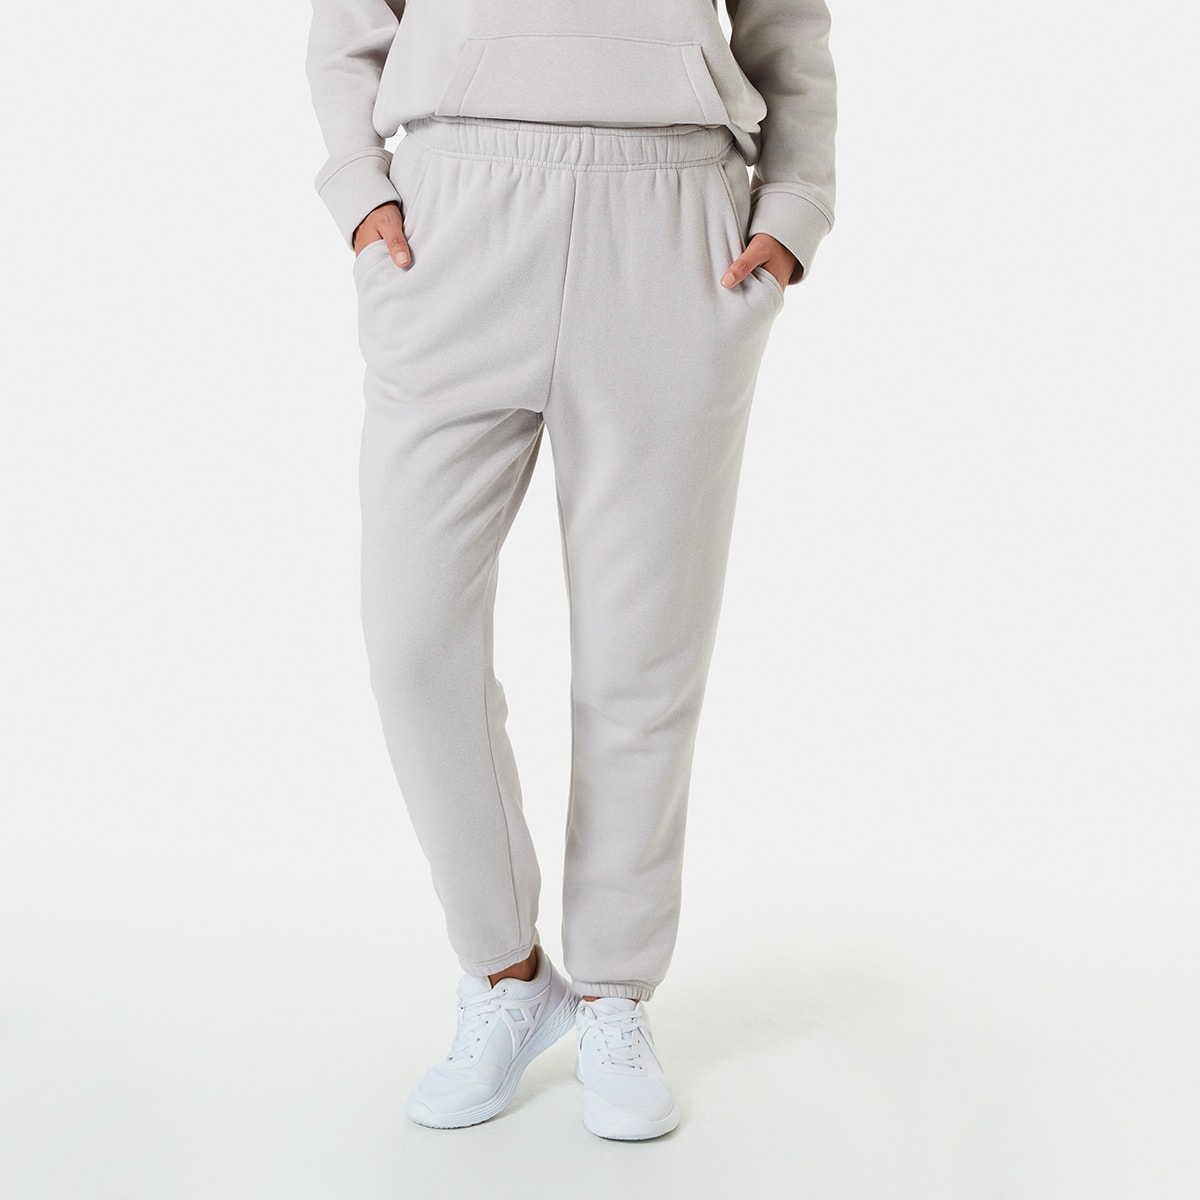 Shop Girls 816 Track Pants Online and in Store  Kmart